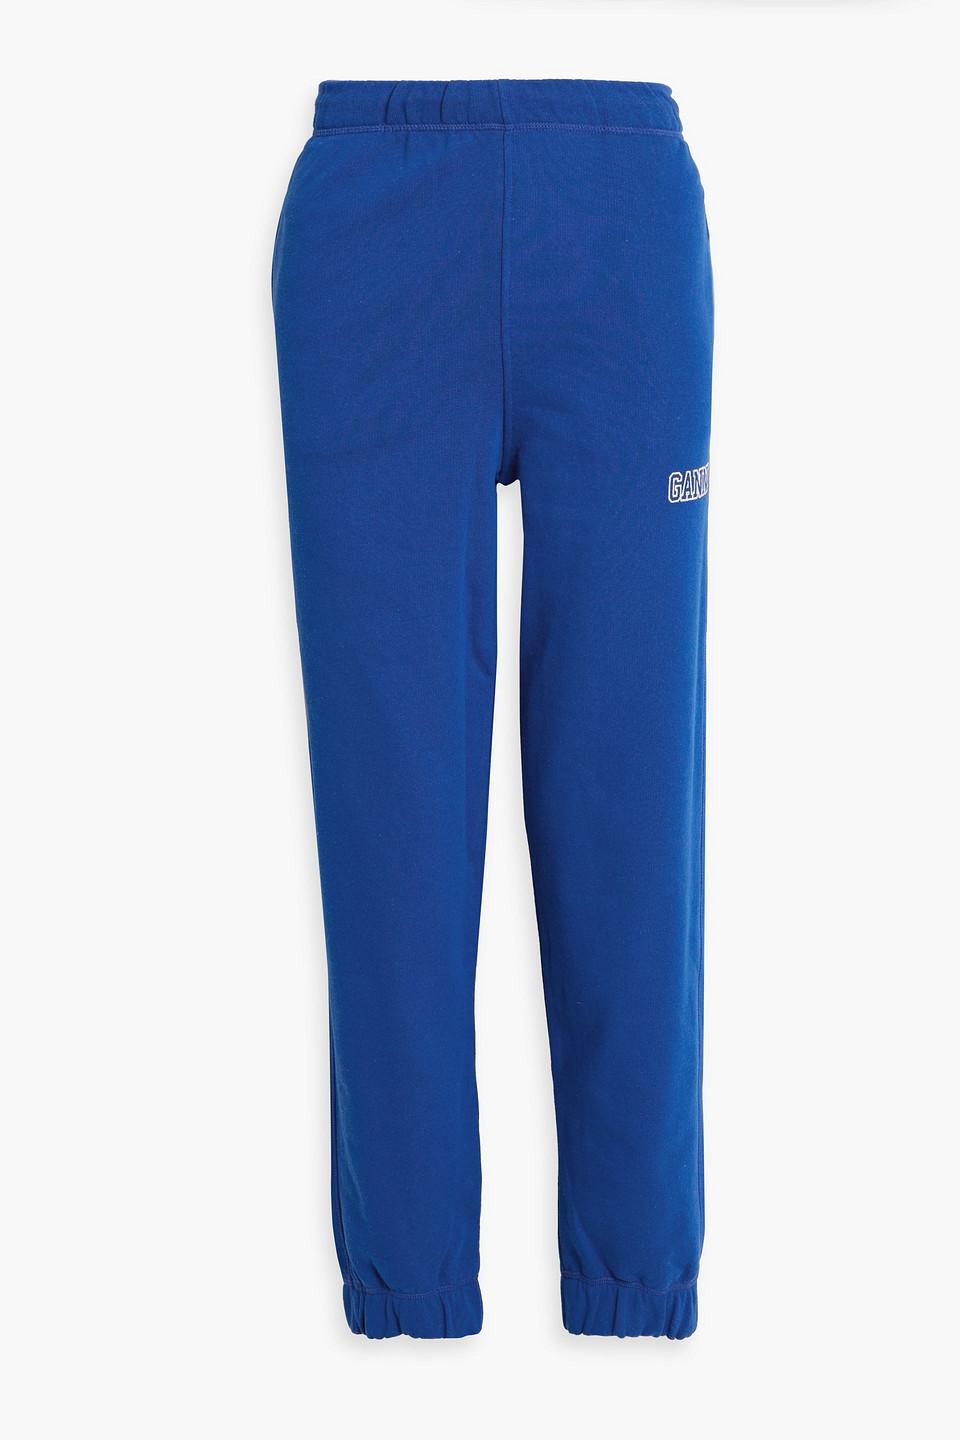 Ganni Embroidered French Cotton-blend Terry Track Pants in Blue | Lyst